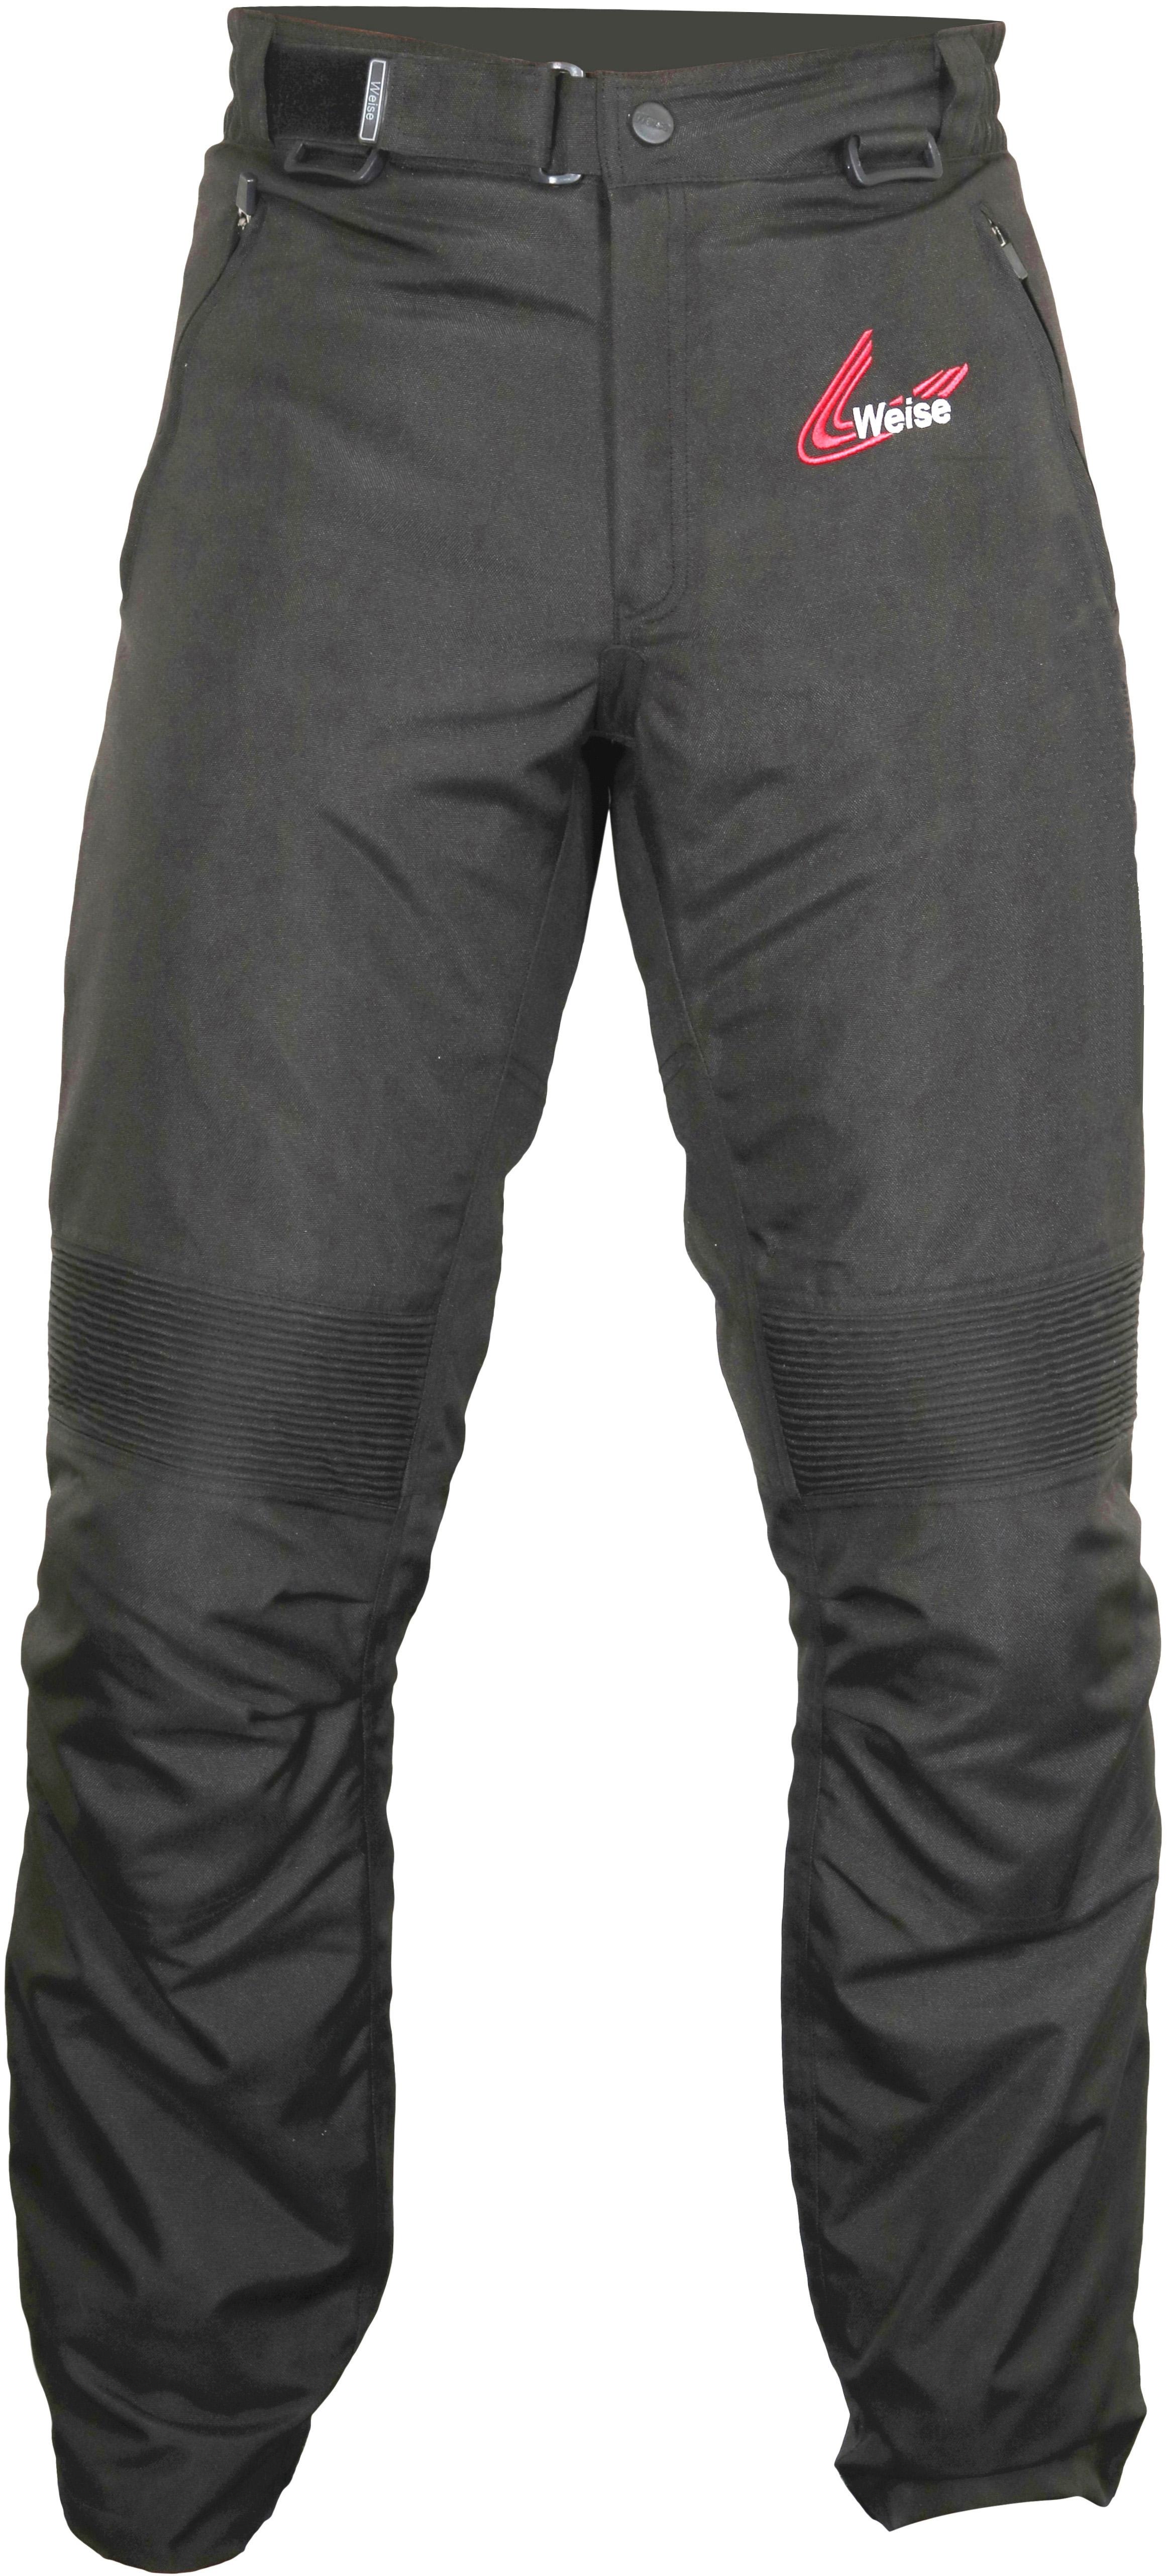 Weise Core Plus Motorcycle Jeans - Black, 3Xl